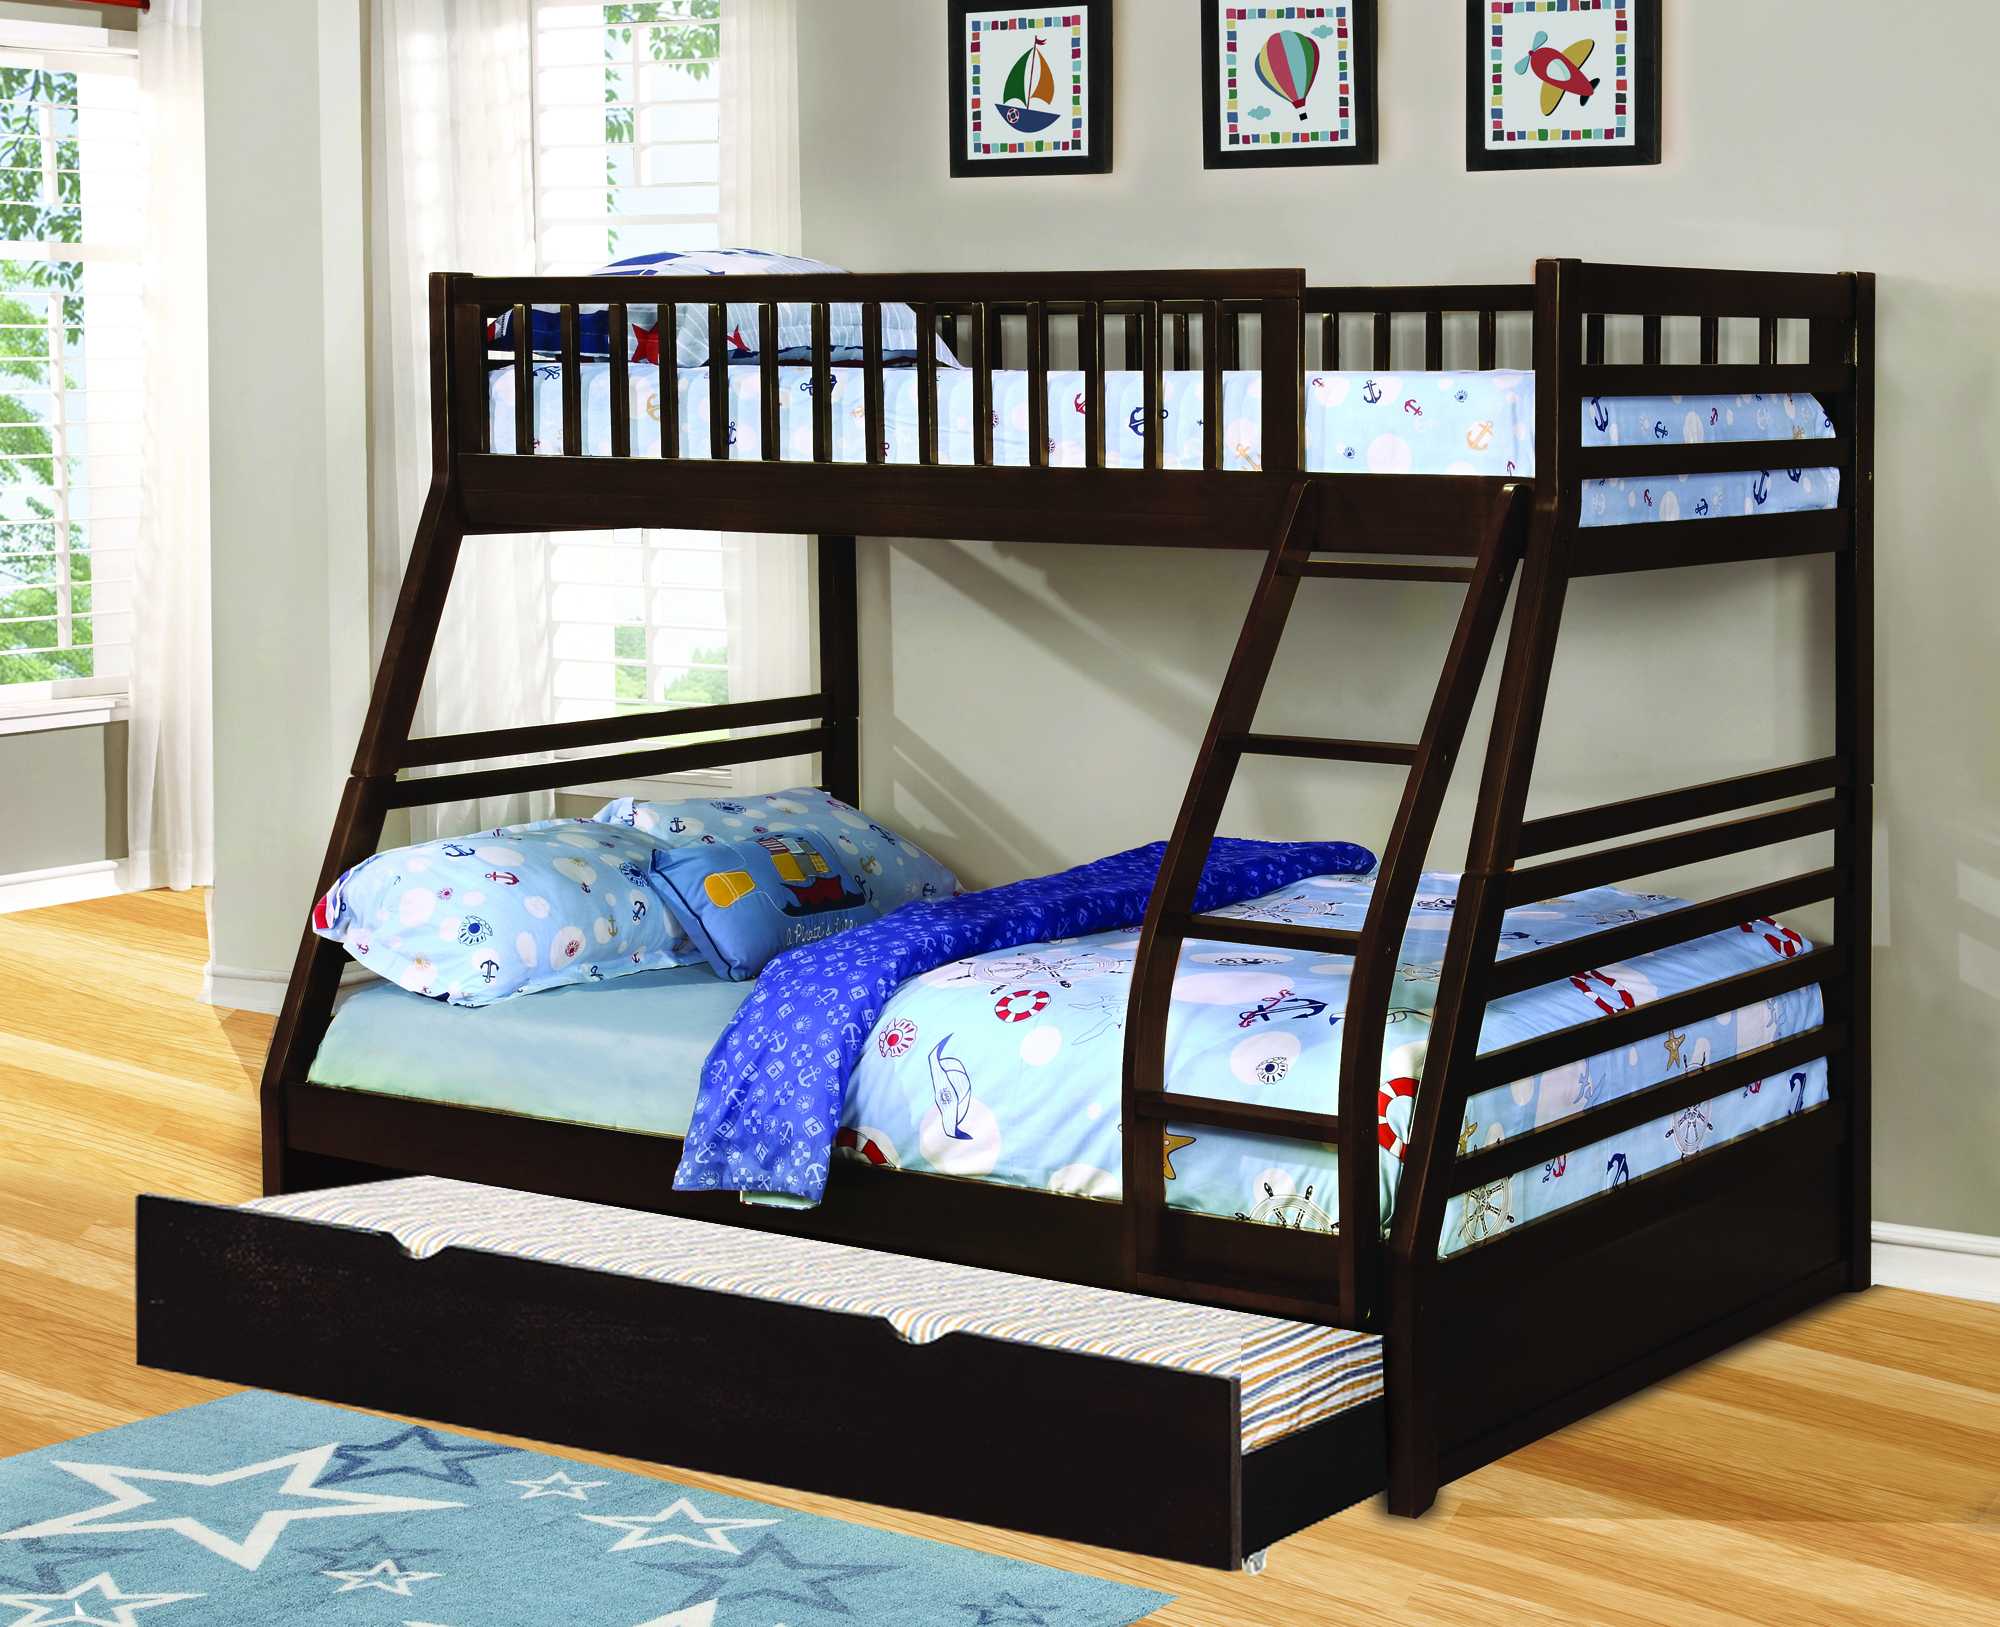 78.75" X 42.5-57.25" X 65" Brown Manufactured Wood and Solid Wood Twin or Full Bunk Bed with Matching Trundle